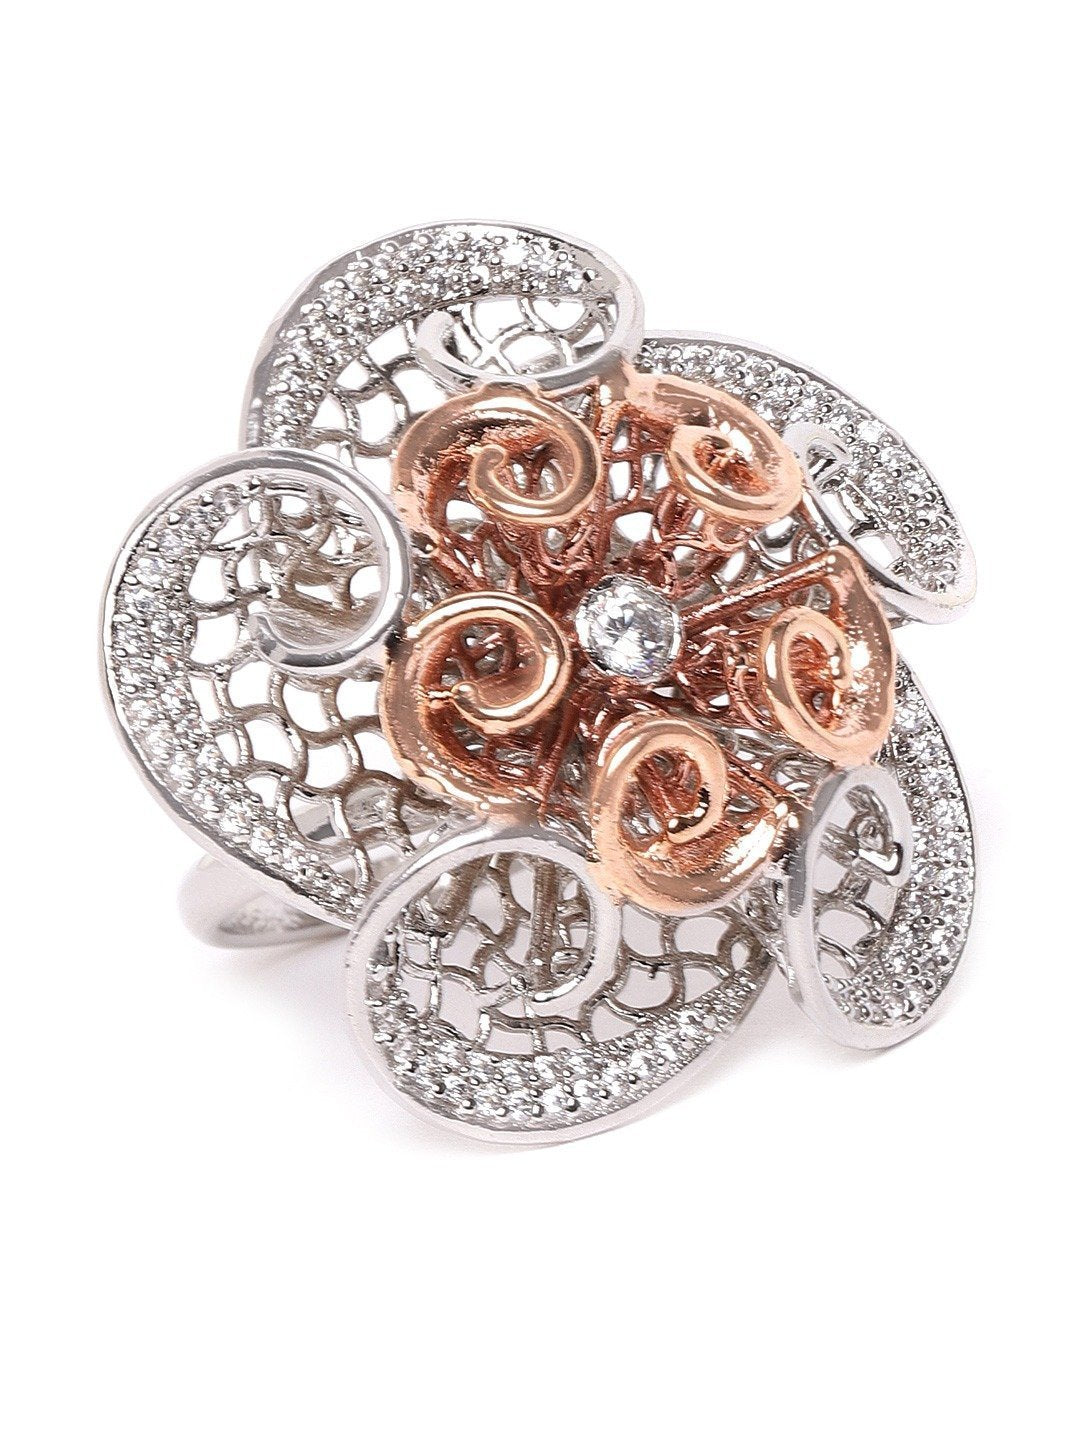 Women's Rose Gold and Silver Plated AD Studded Finger Ring - Priyaasi